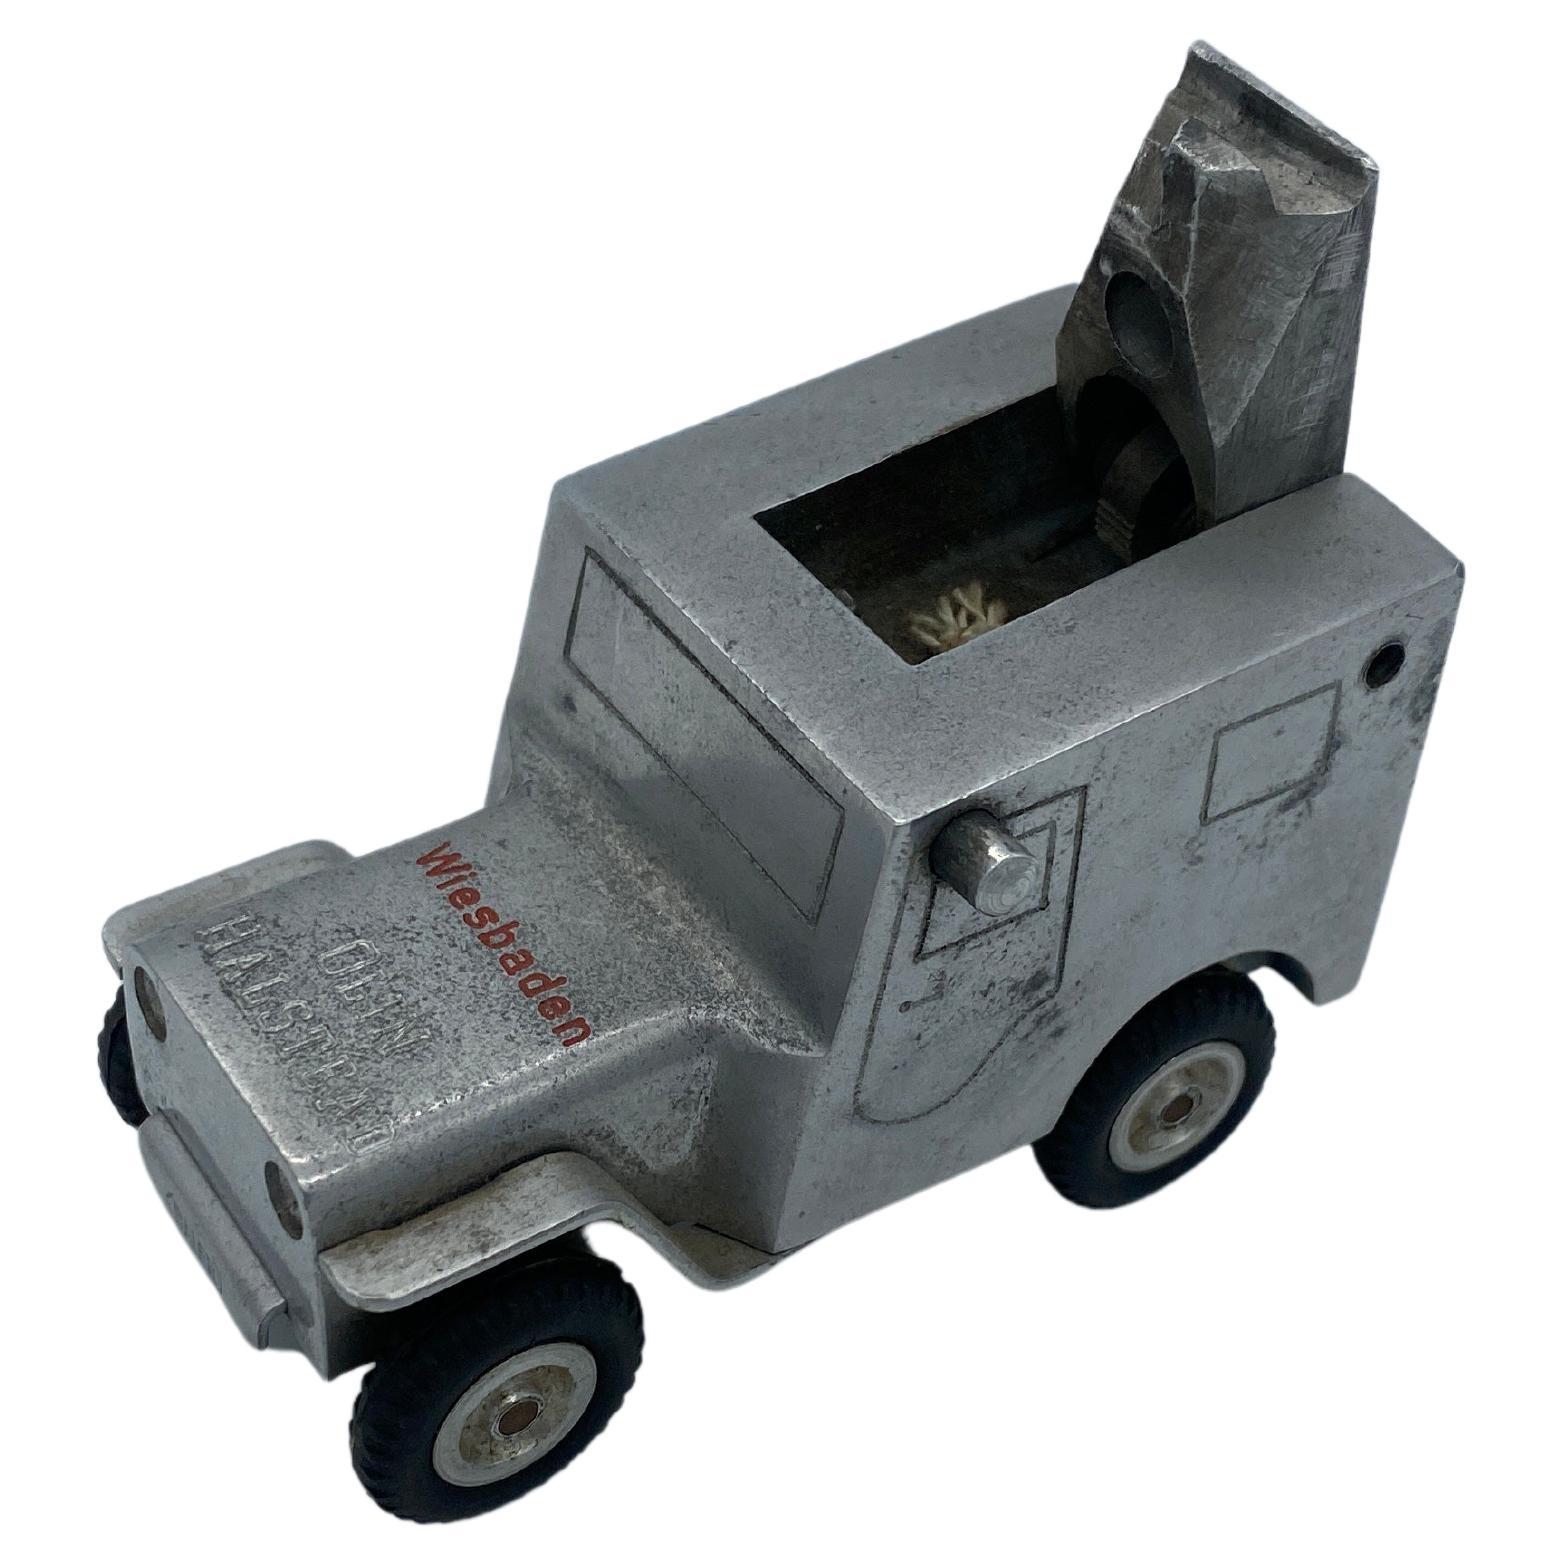 Rare Hand Machined Willys Jeep Ges-Gesch Table Lighter, West Germany by by Baier For Sale